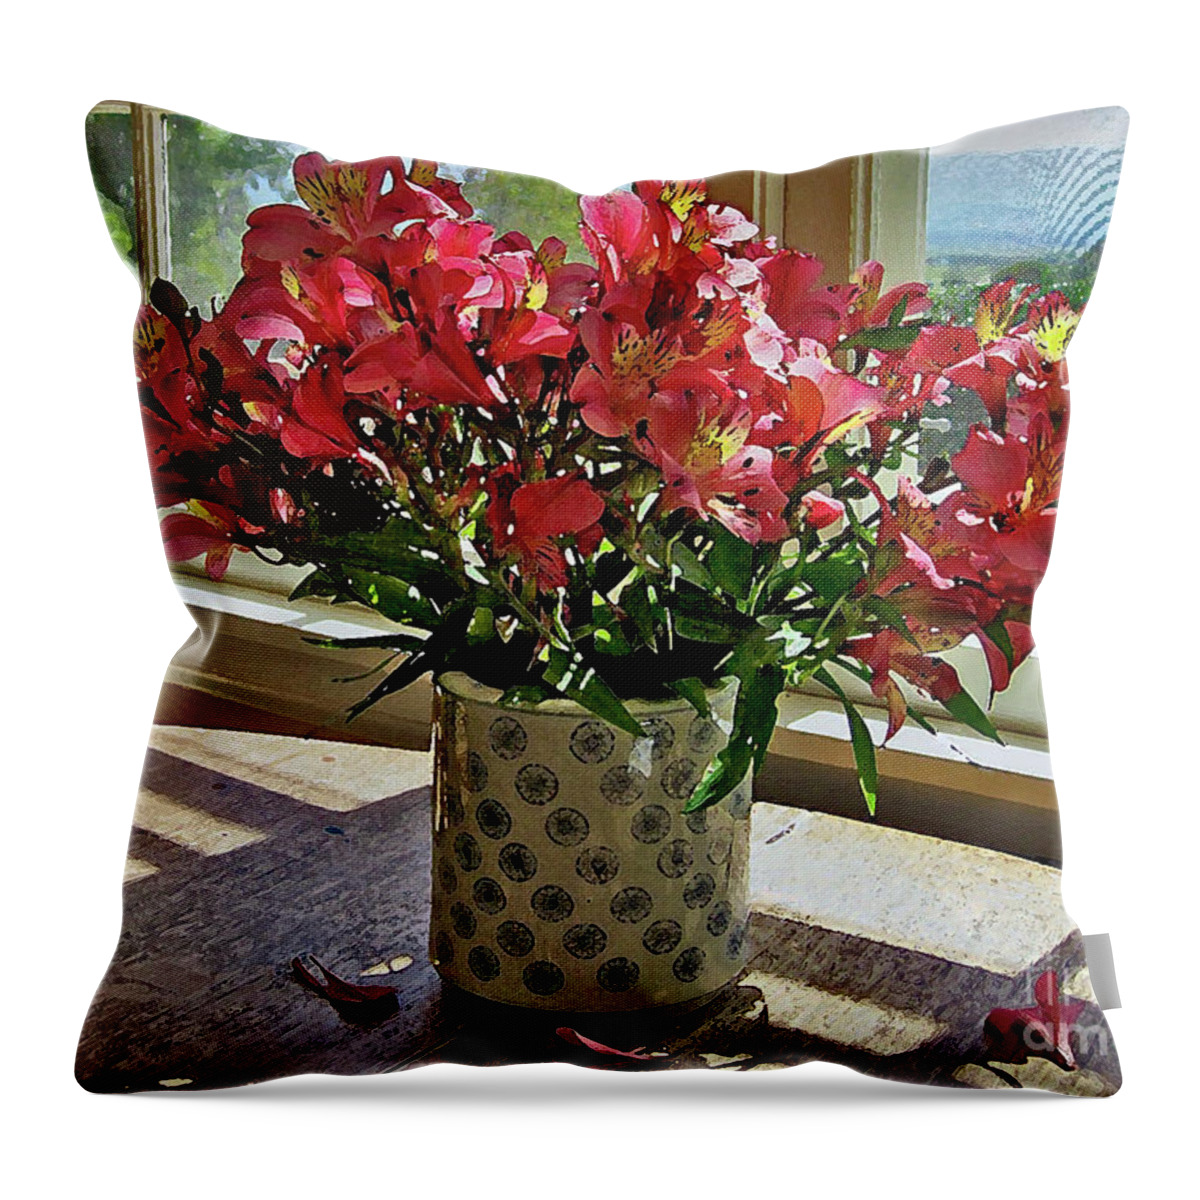 Flowers Throw Pillow featuring the photograph Upcountry Flowers by Bette Phelan